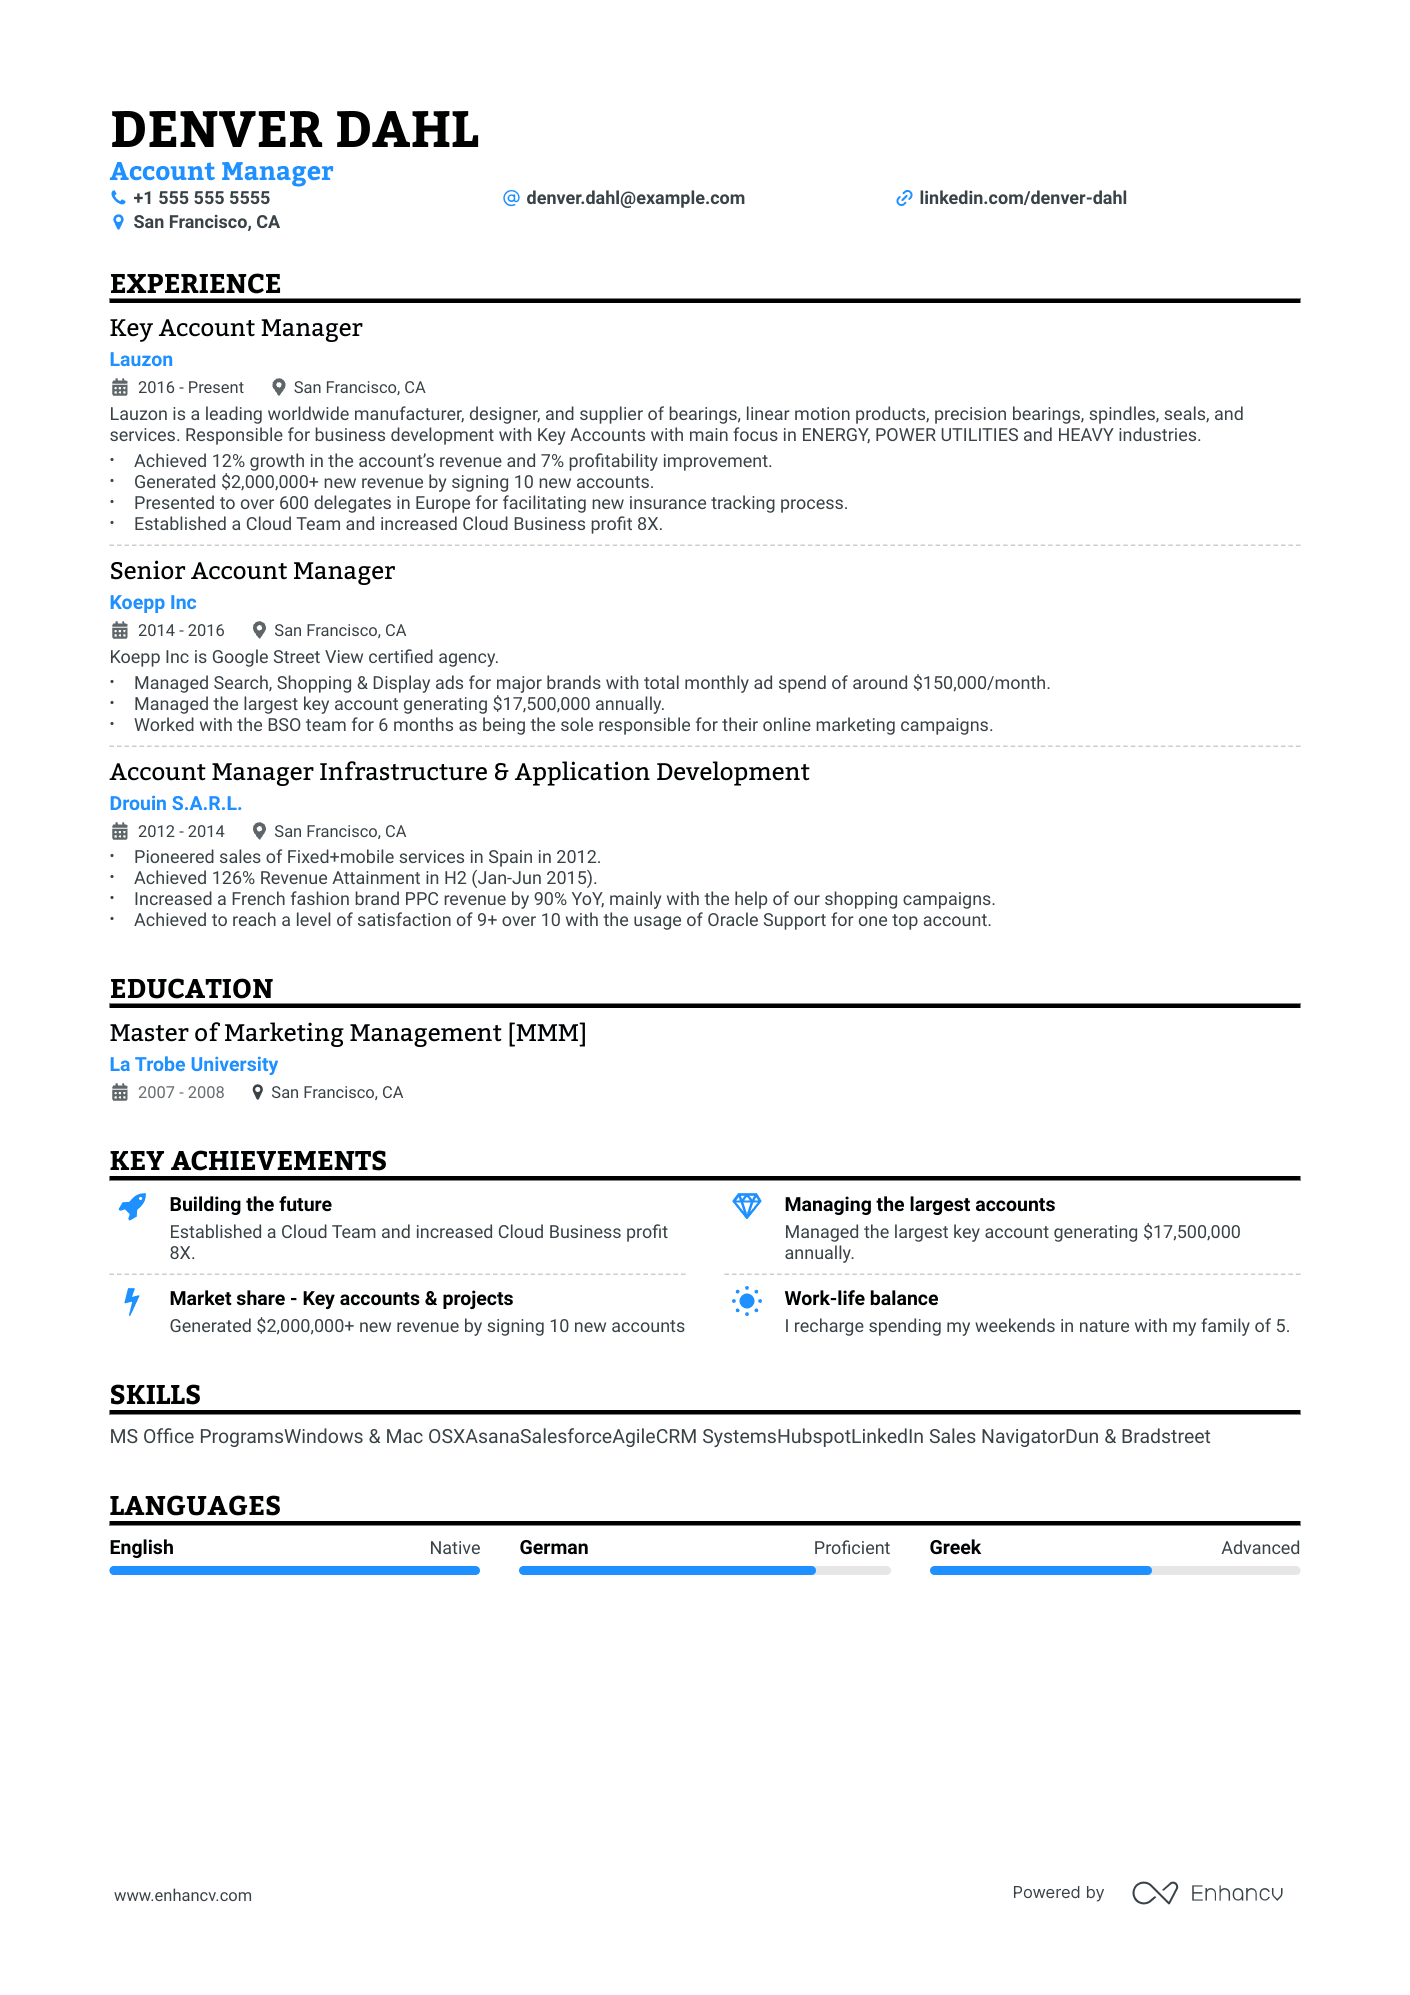 Account Manager CV example